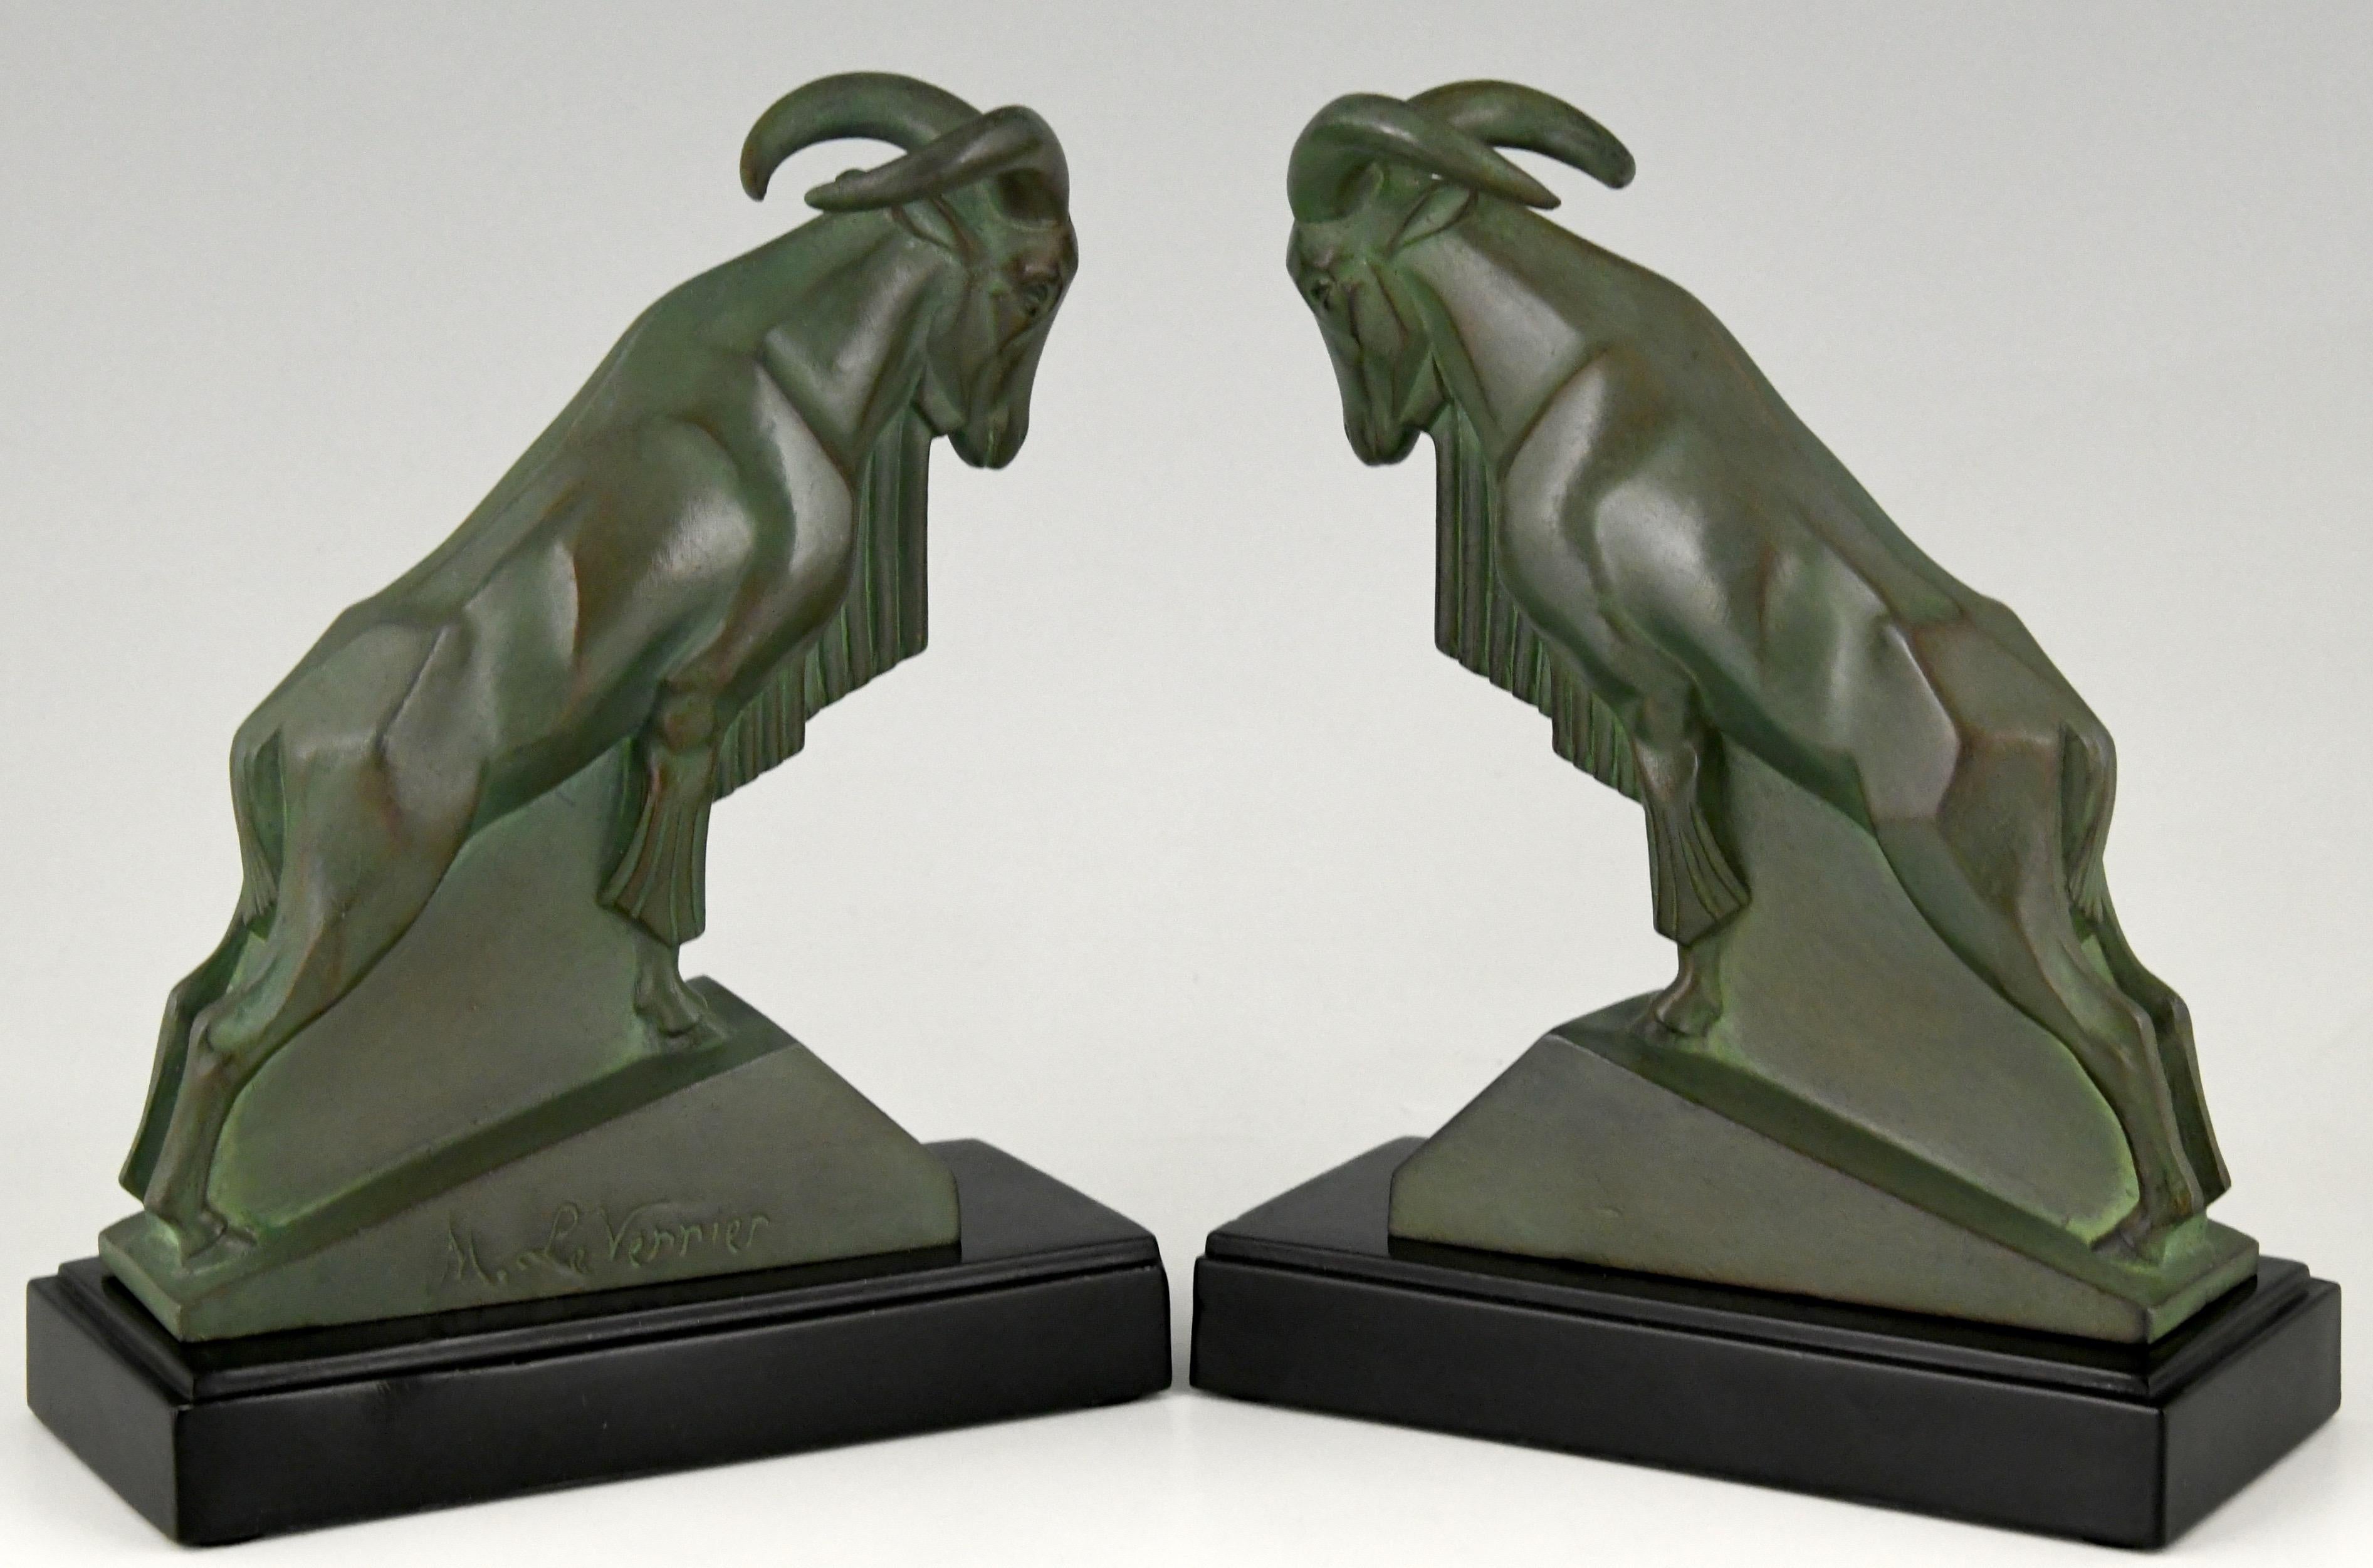 Art Deco Ibex or Ram bookends, signed by the sculptor Max Le Verrier. 
The bookends are in green and black patinated art metal, France 1930. 
Literature:
Art Deco sculpture by Victor Arwas, Academy.
Bronzes, sculptors and founders by H. Berman,